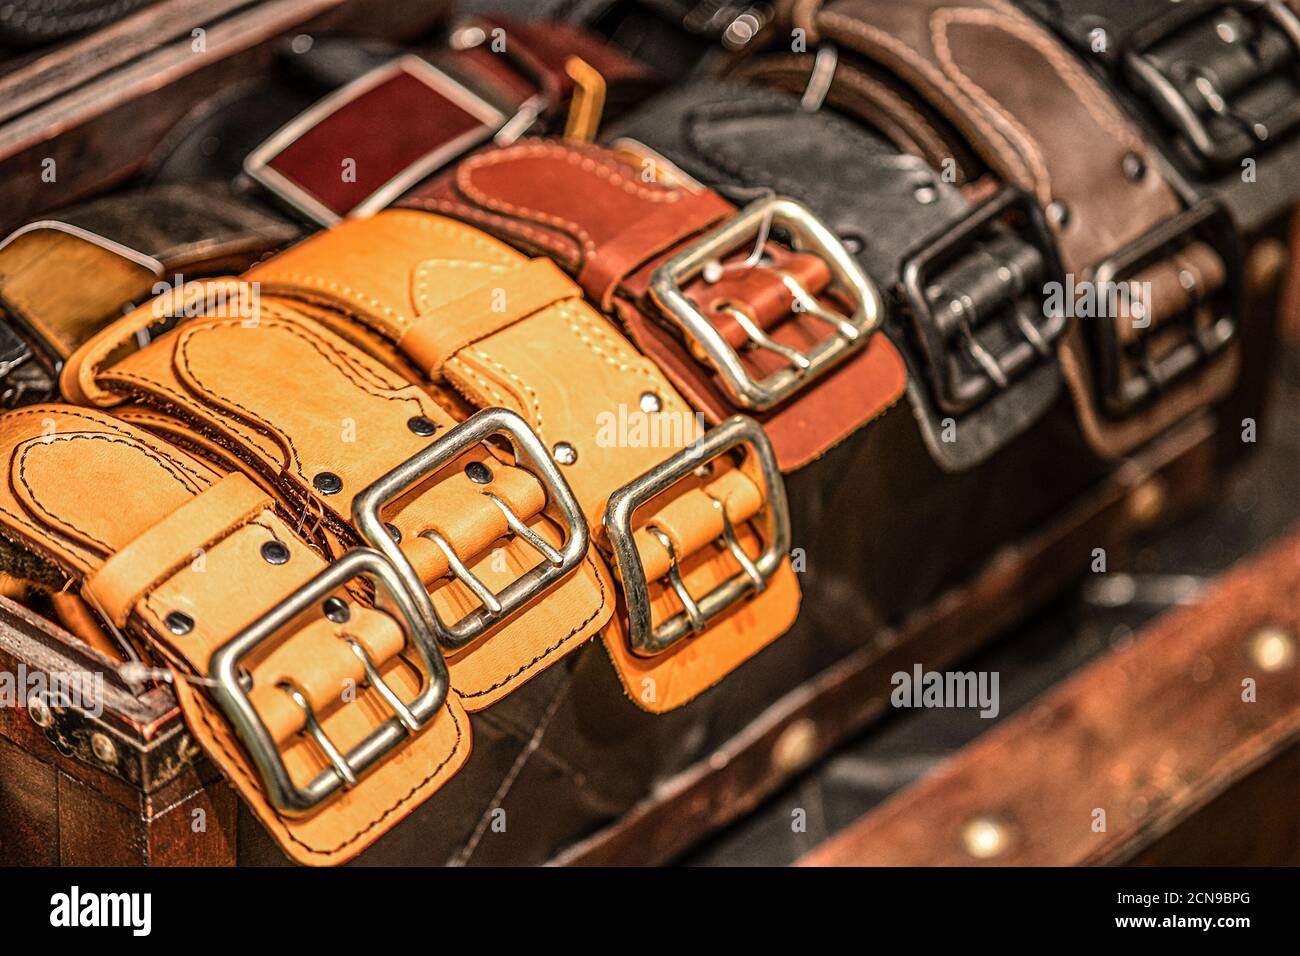 Leather belts with shiny gold-plated buckles. Handmade from genuine cowhide leather Stock Photo